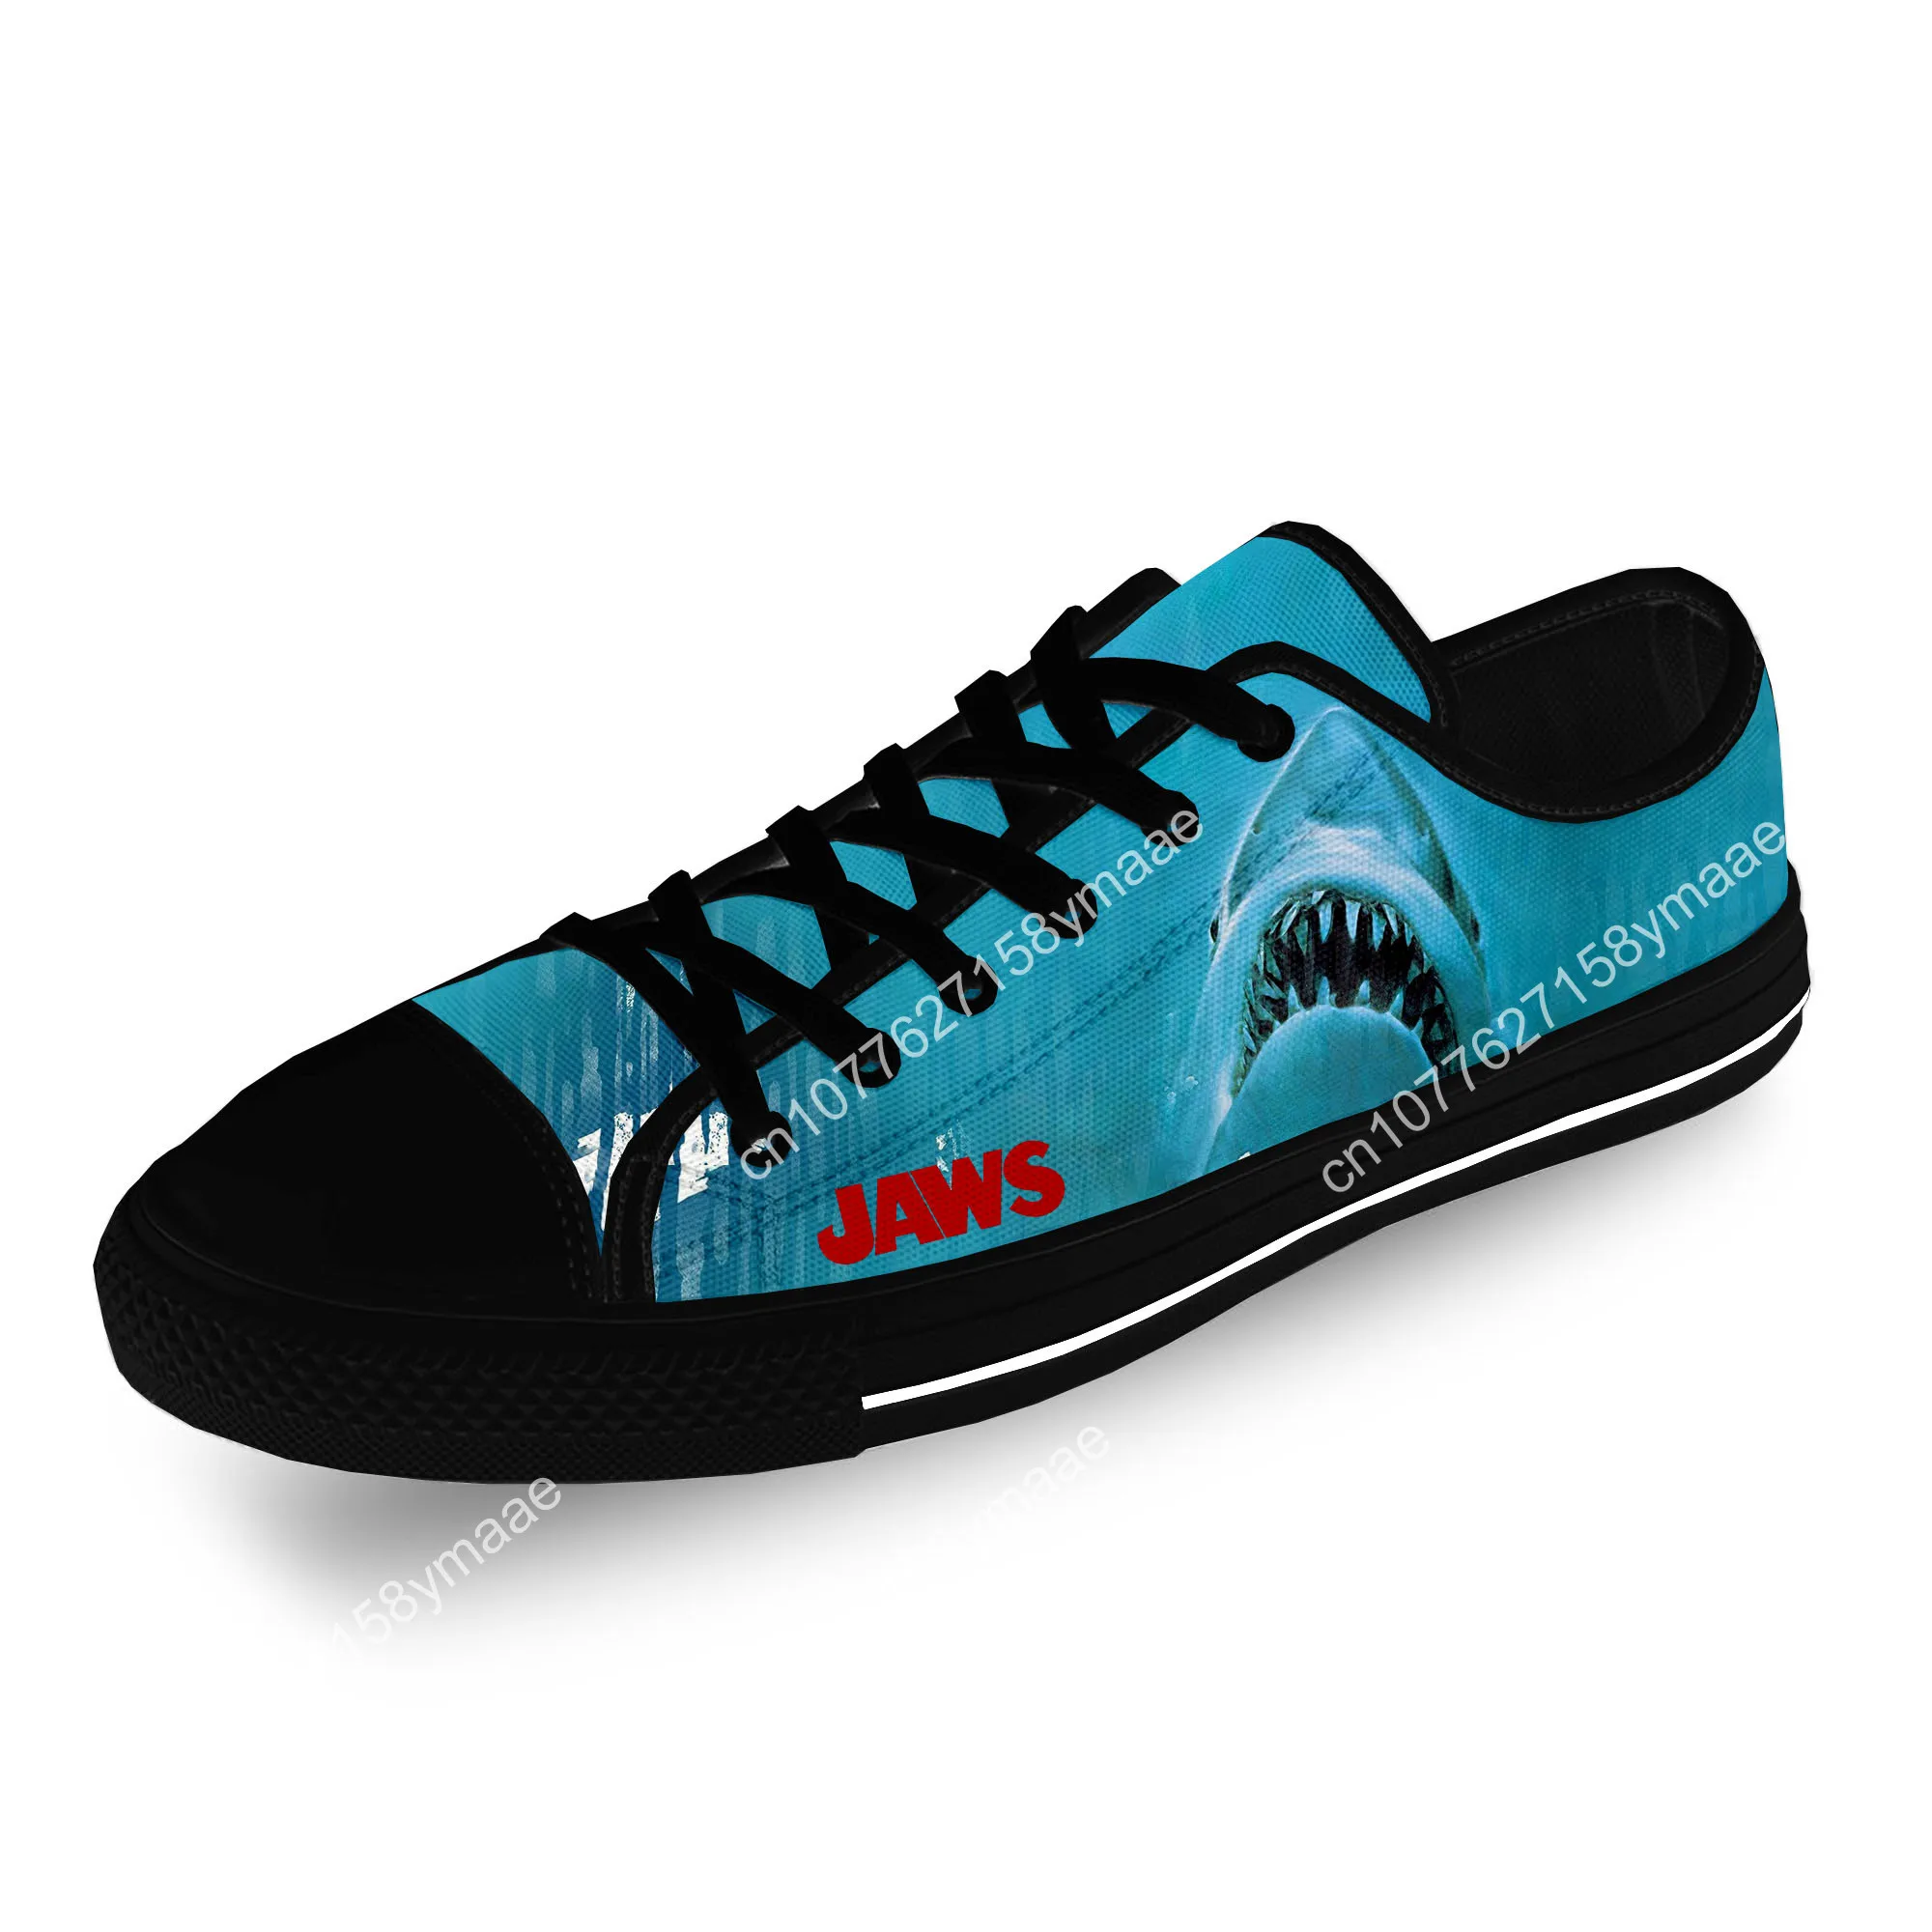 Jaws Movie Shark Horror Casual Funny Cloth 3D Print Low Top Canvas Fashion Shoes Men Women Lightweight Breathable Sneakers